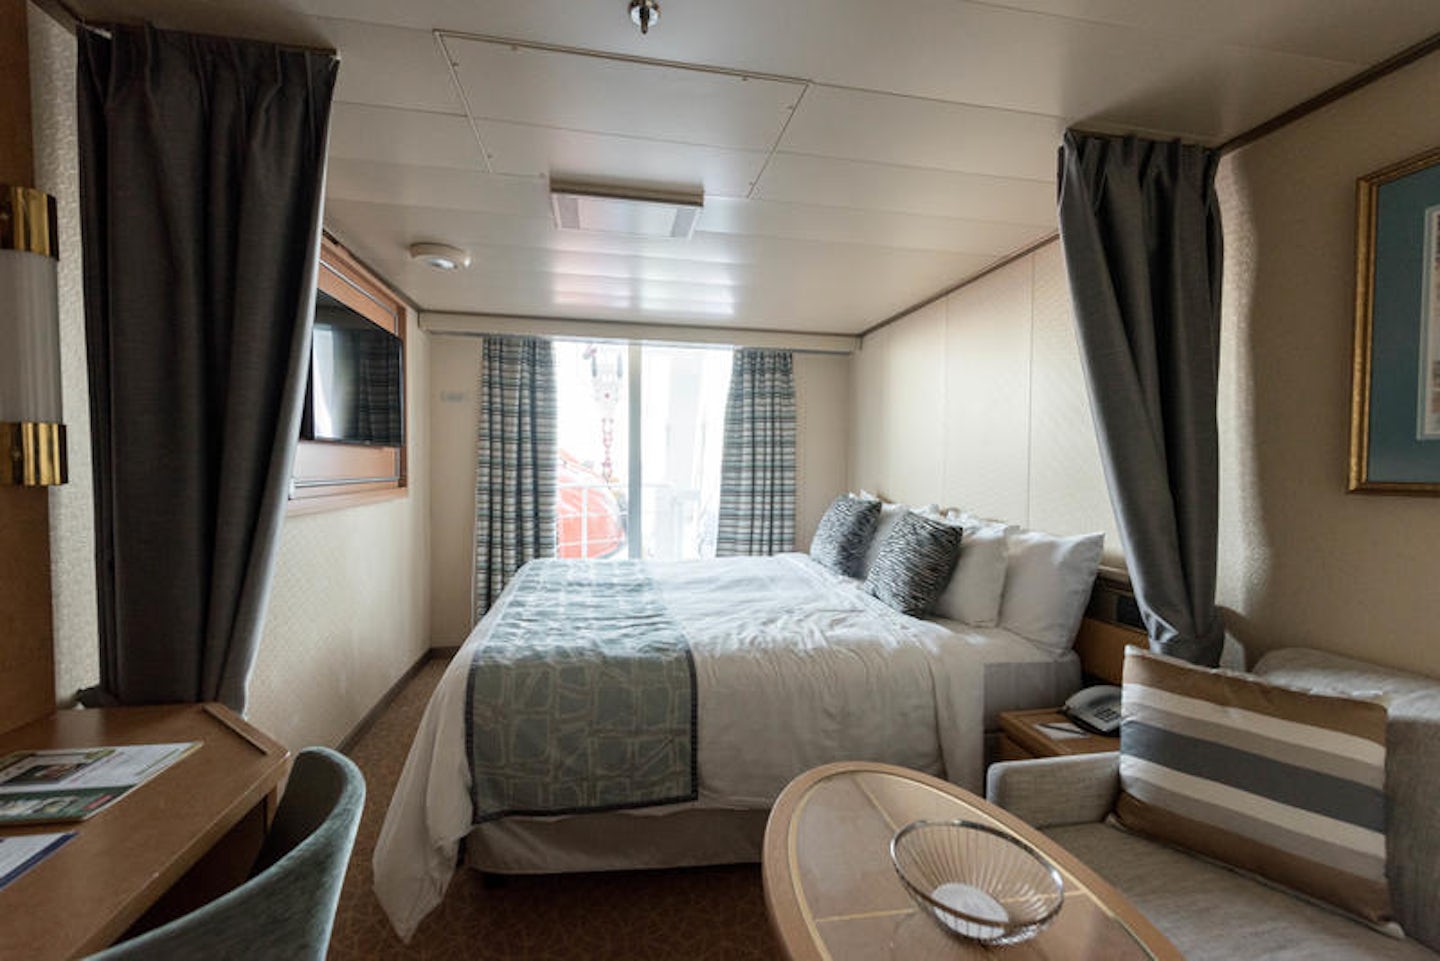 The Obstructed Ocean-View Cabin on Westerdam